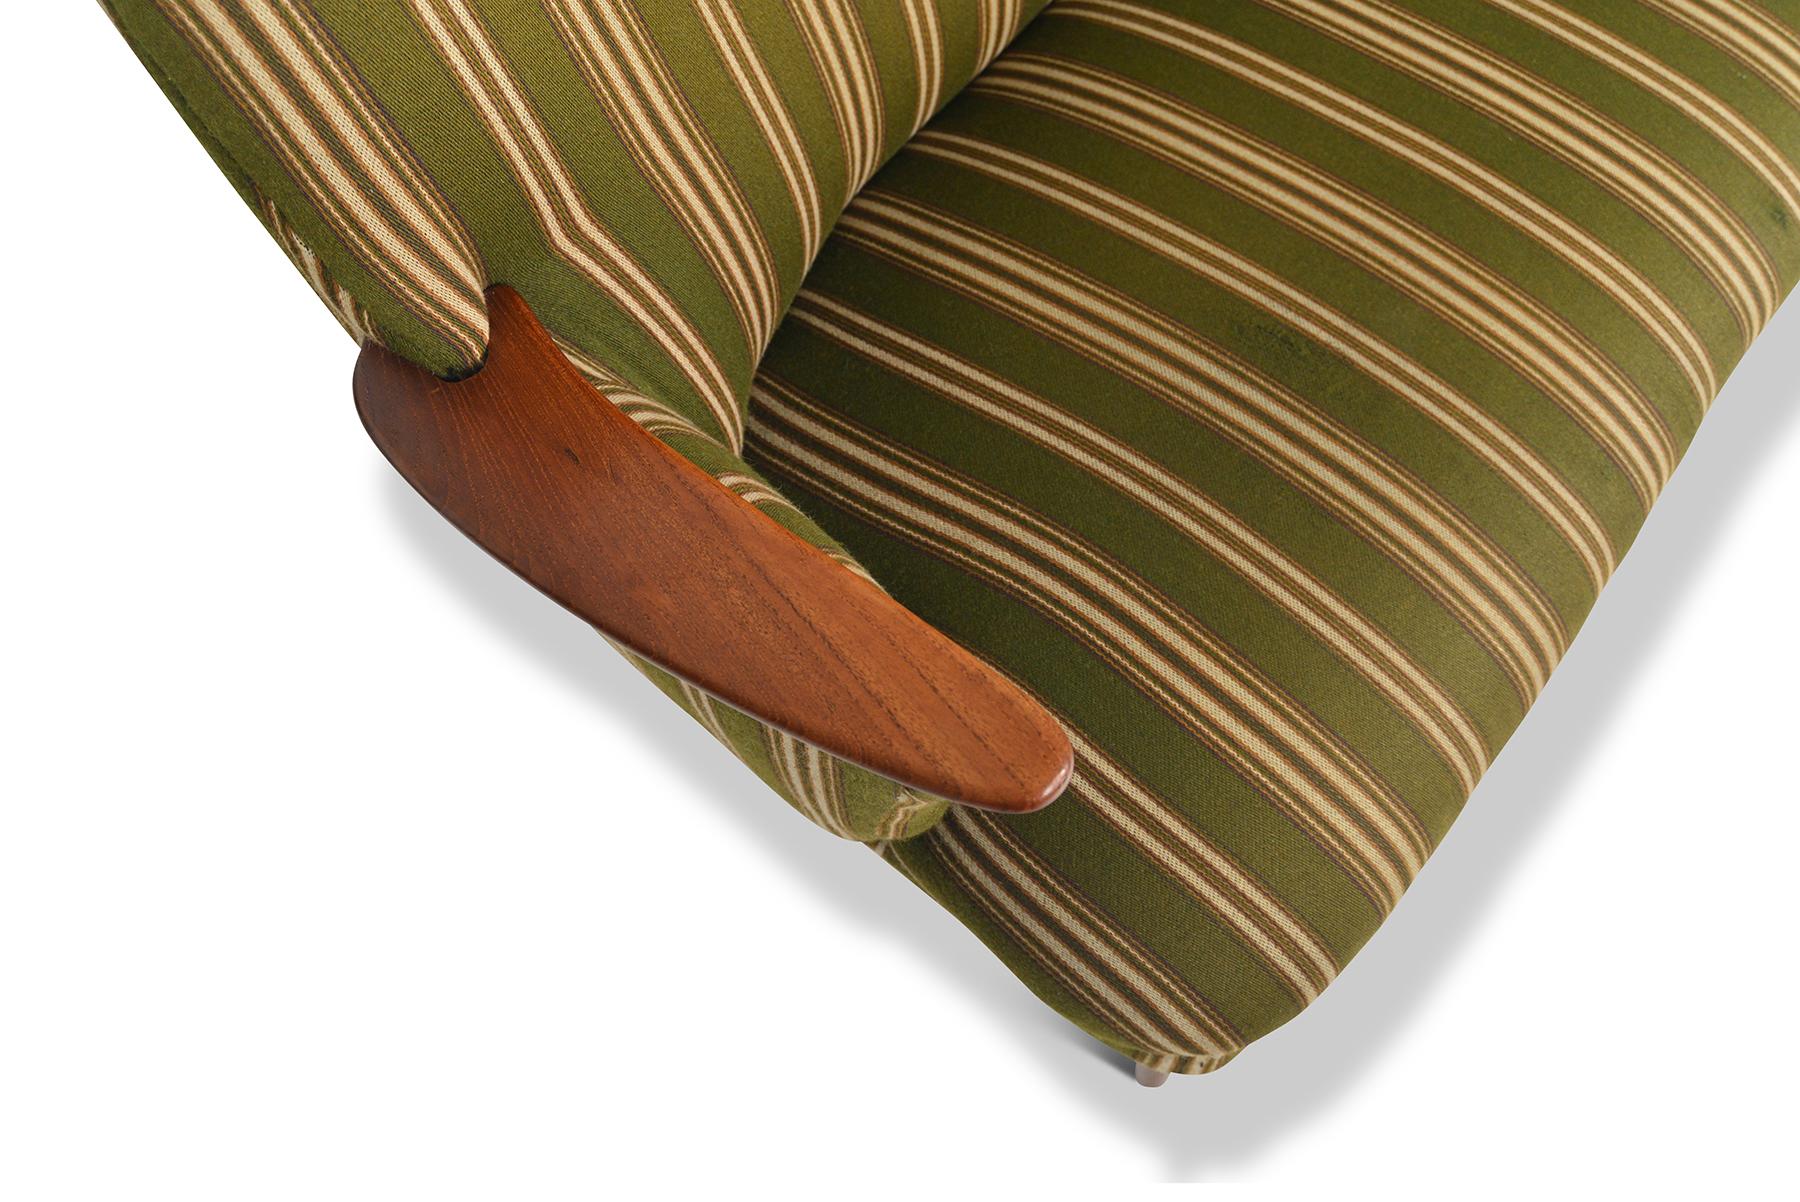 green striped couch